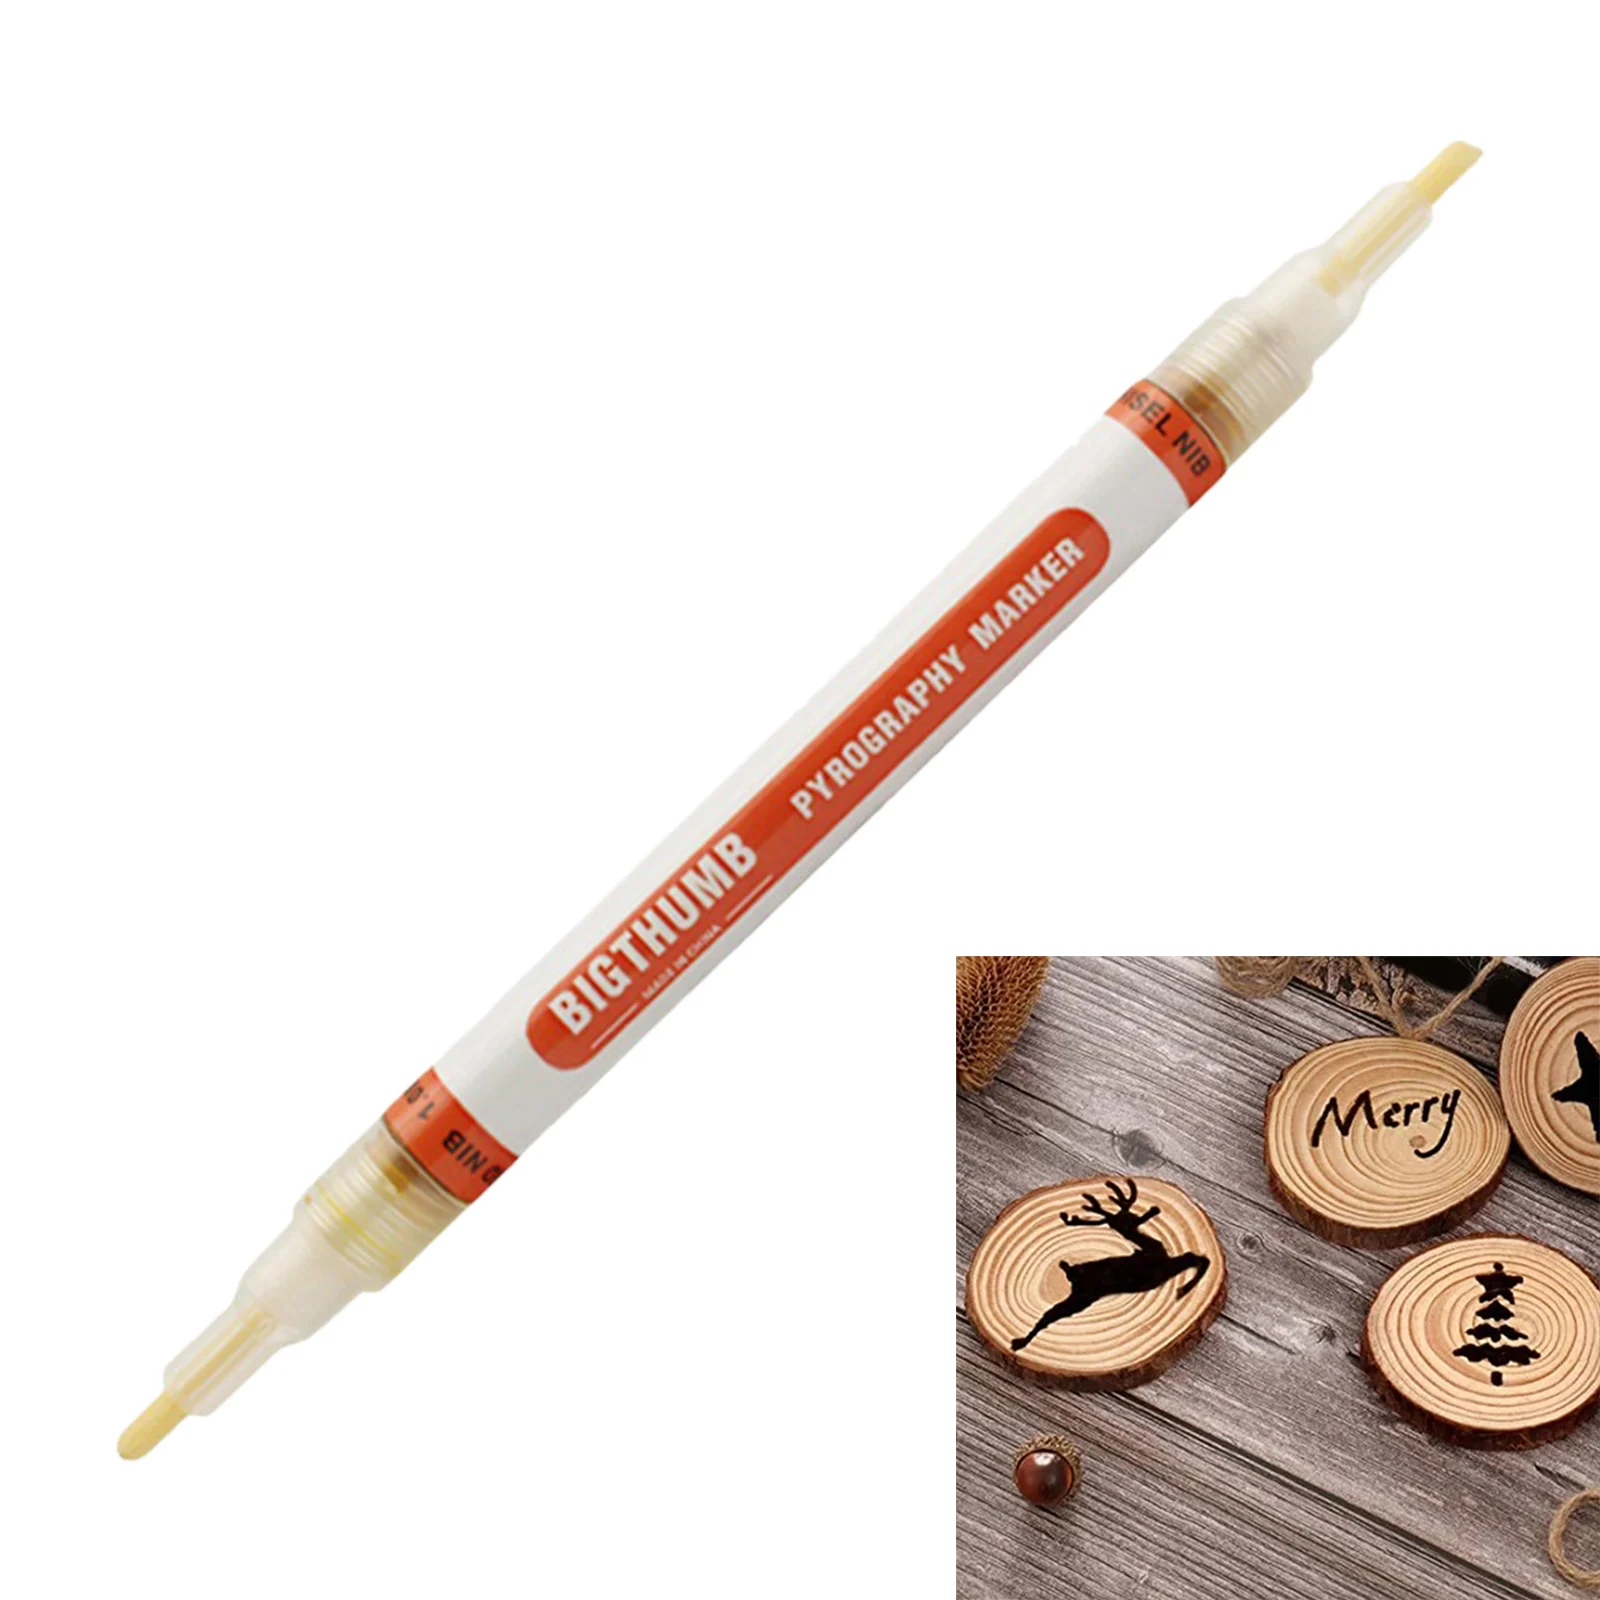 Double Head Wood Burning Pen Scorch Wood Burned Marker Pyrography Pens for DIY Projects Fine Tip Woodworking Supplies